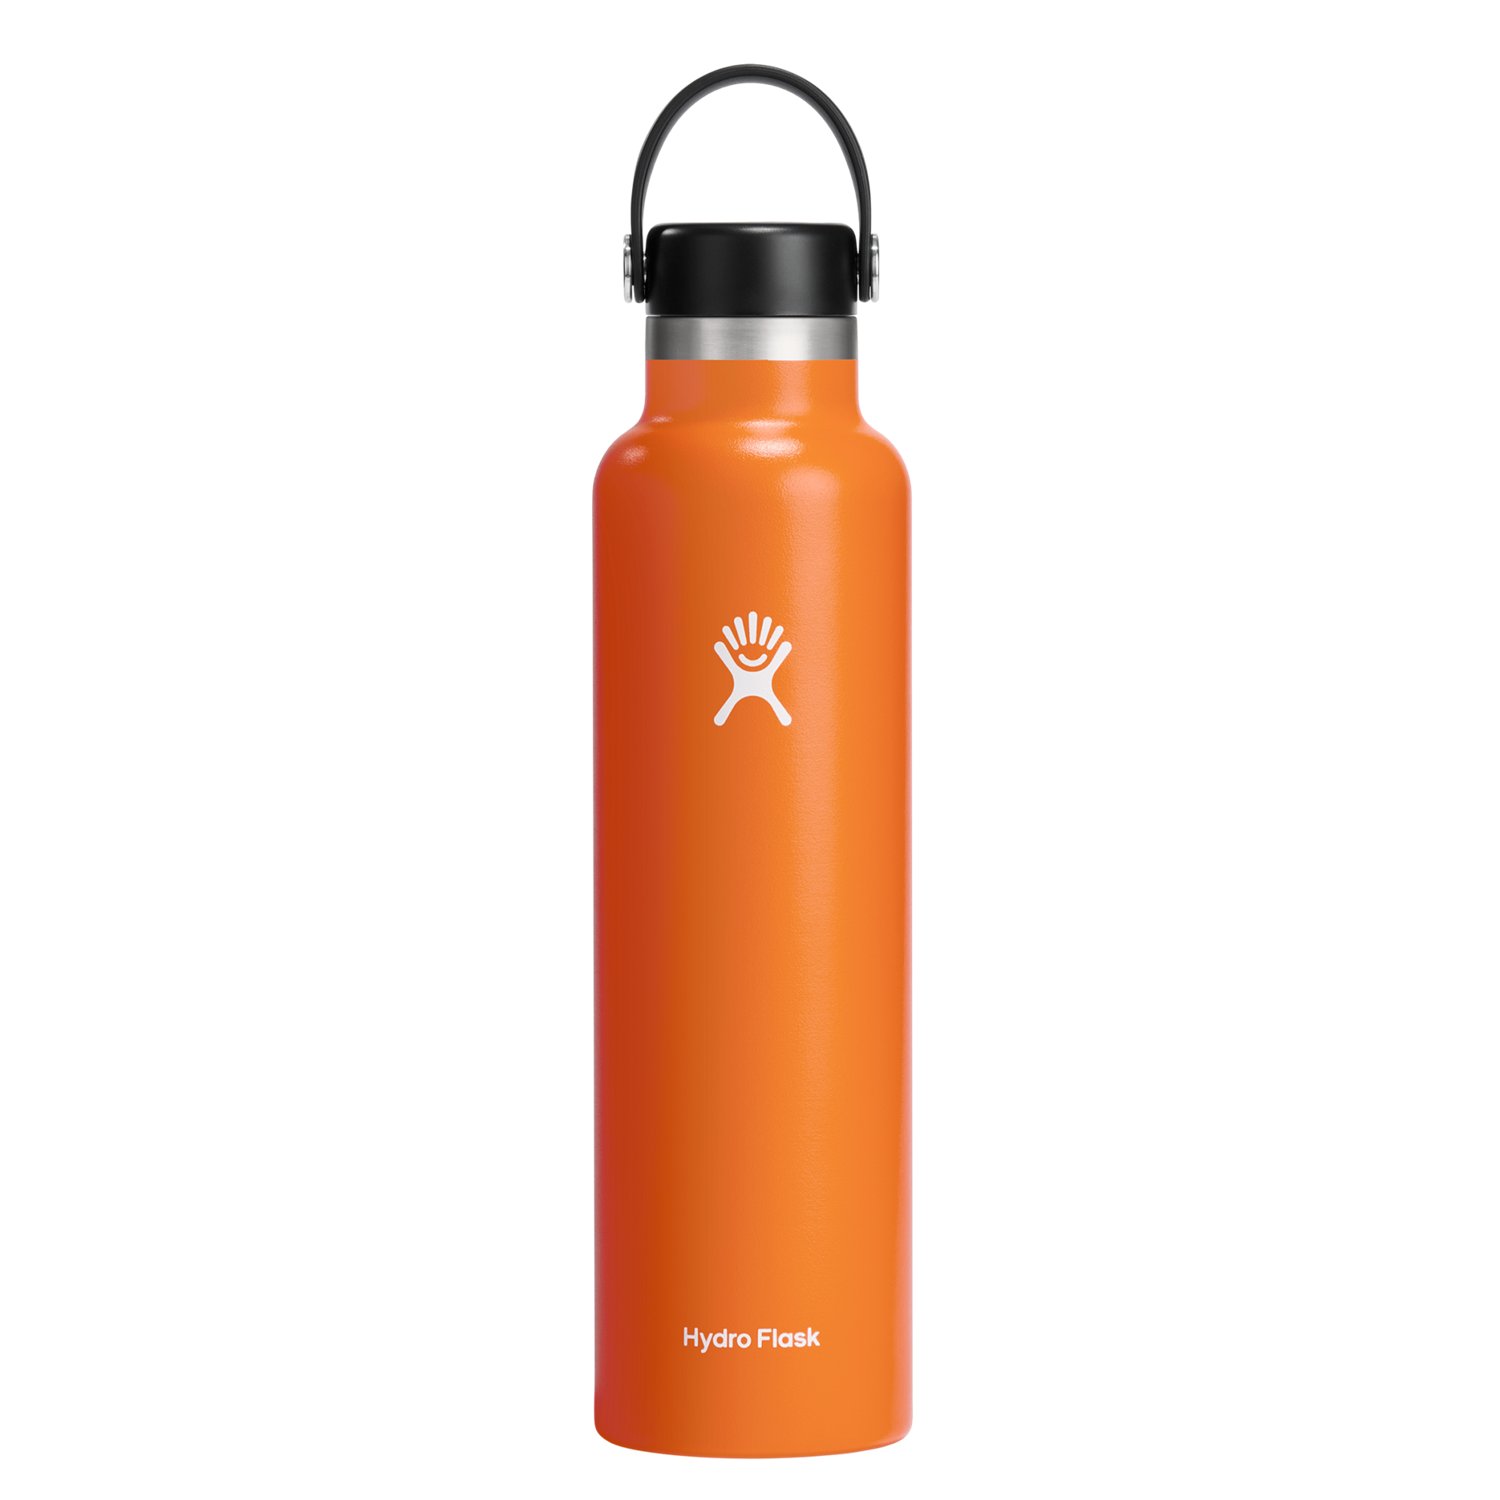 https://academy.scene7.com/is/image/academy///camping/drinkware/orange_hydro-flask-24-oz.-standard-mouth-water-bottle_s24sx808/44e0794669d74bf584196394fe179028